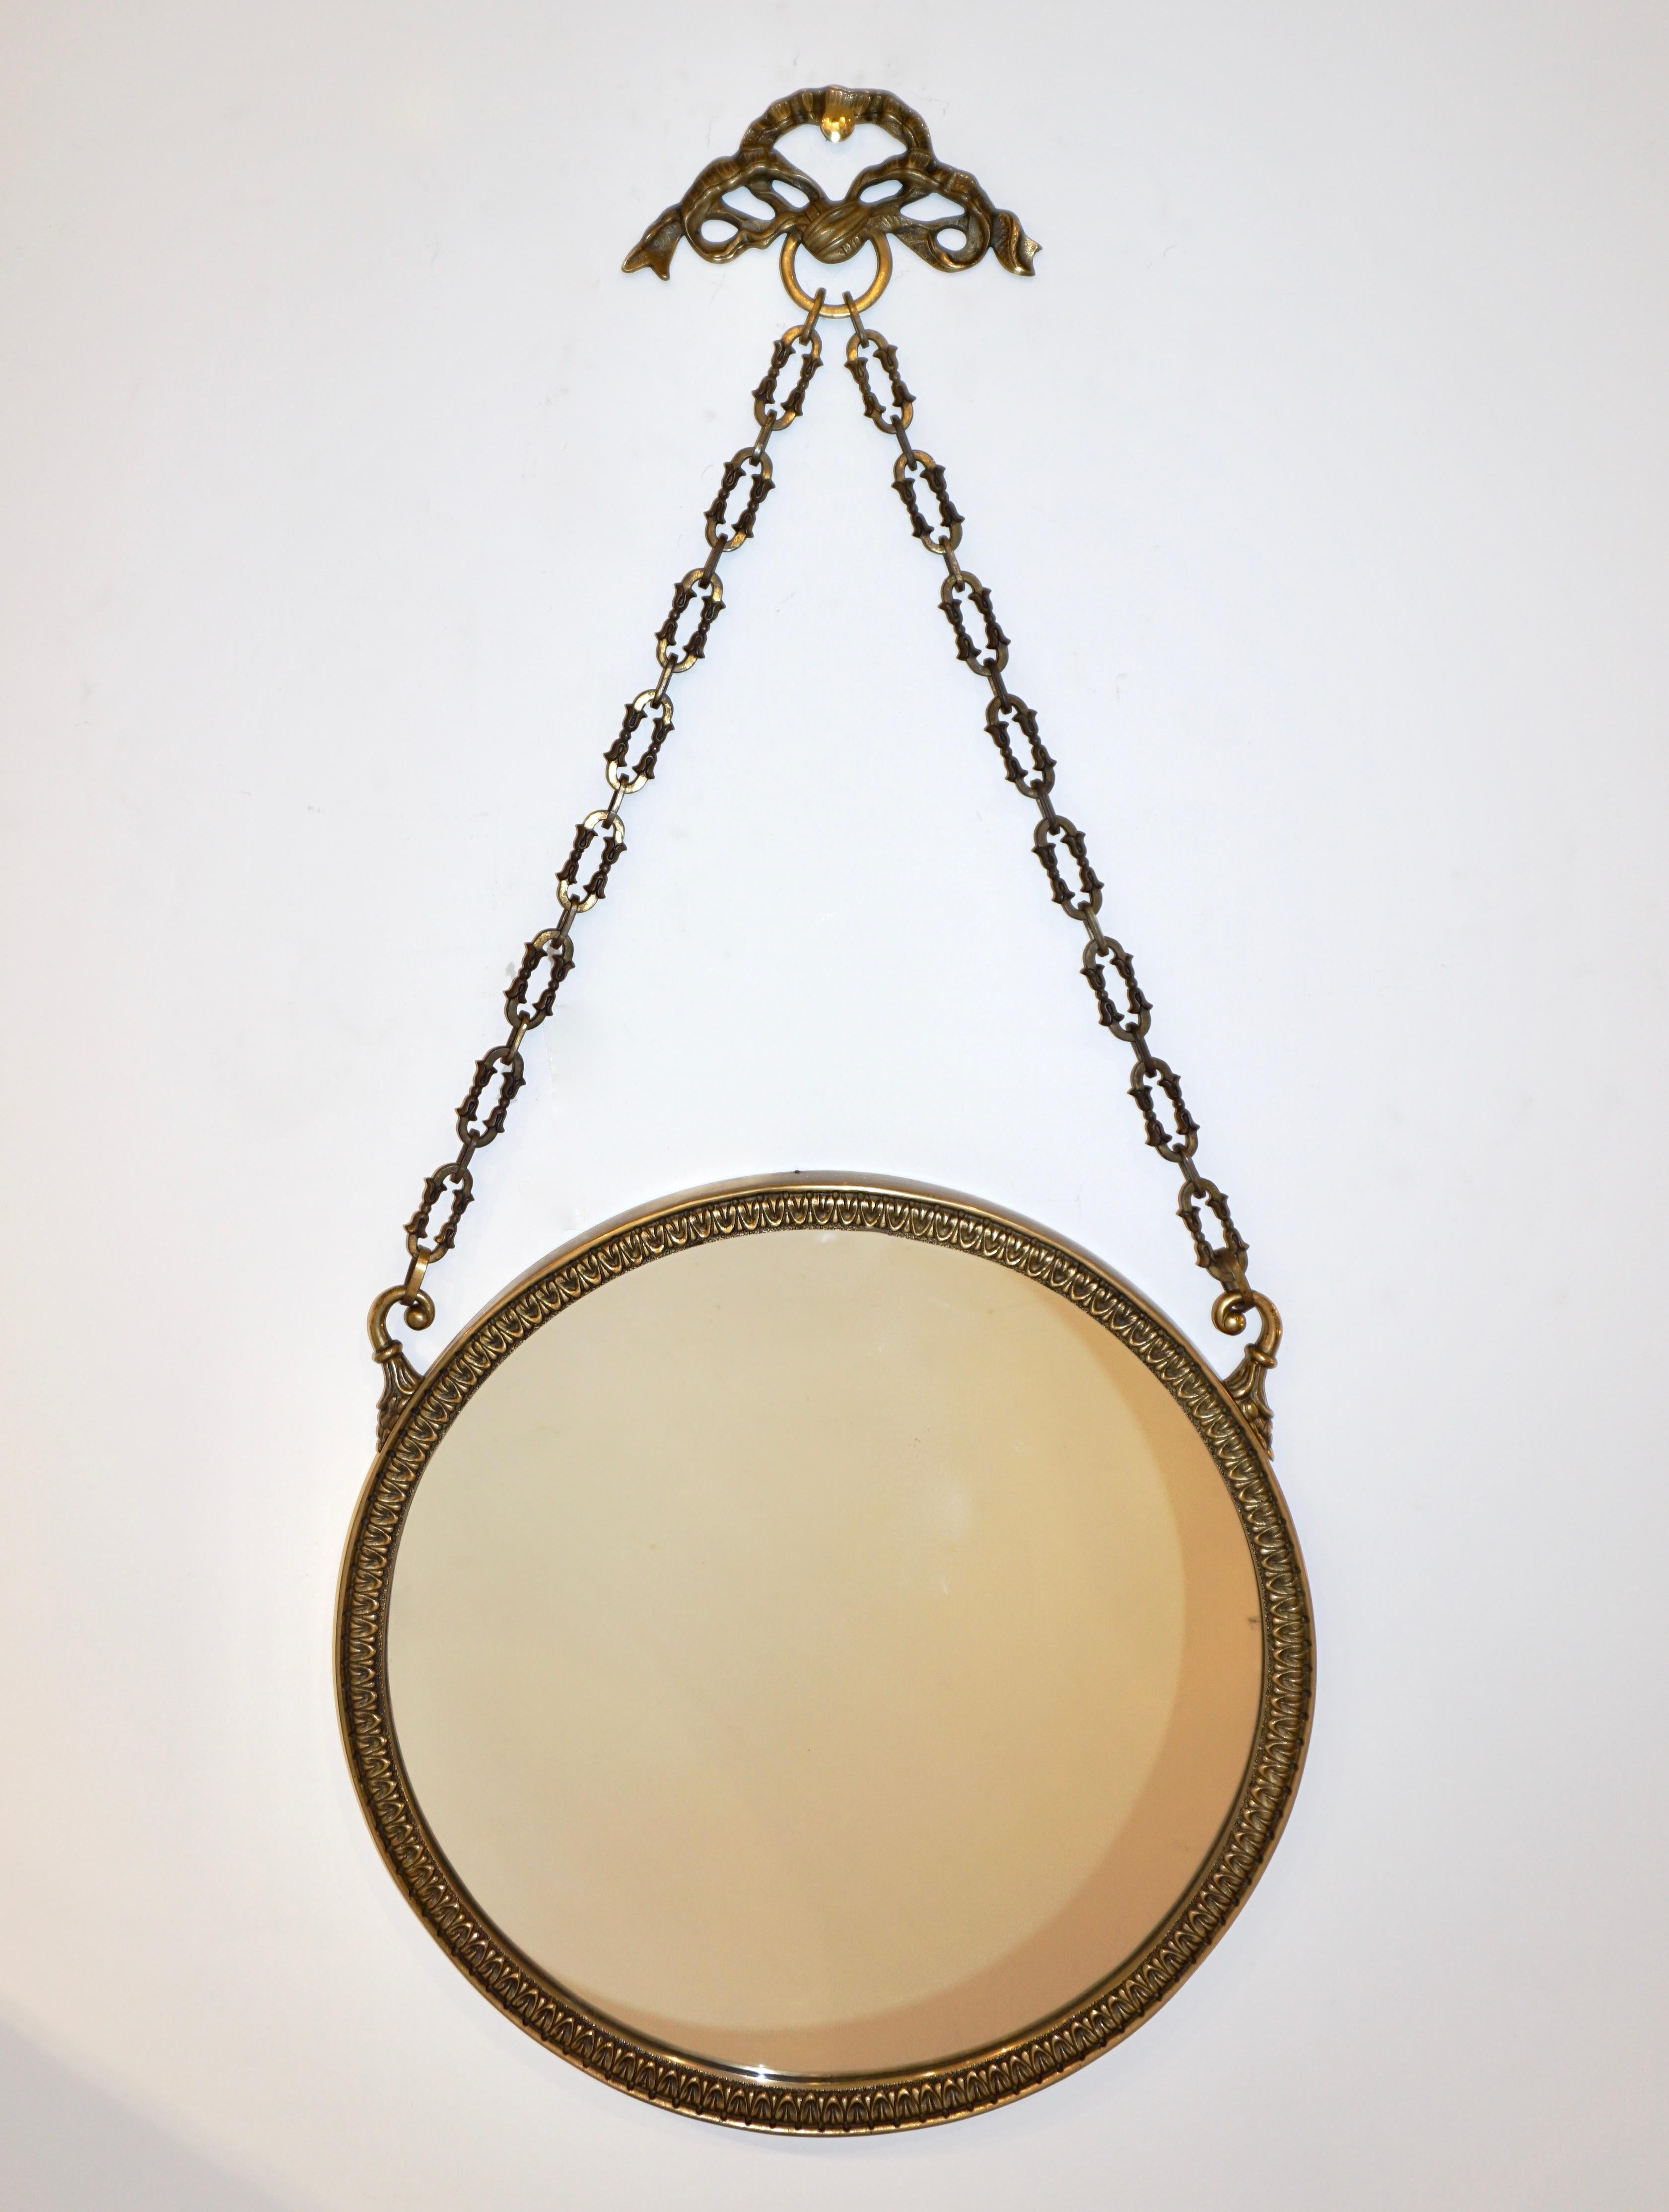 Louis XVI style charming wall mirror, entirely handcrafted in bronze. The round plate is encased in a chased frame with heart leaf decor in relief, hanging from 2 chased hooks with a decorative chain and knot. High quality of execution, ideal for a